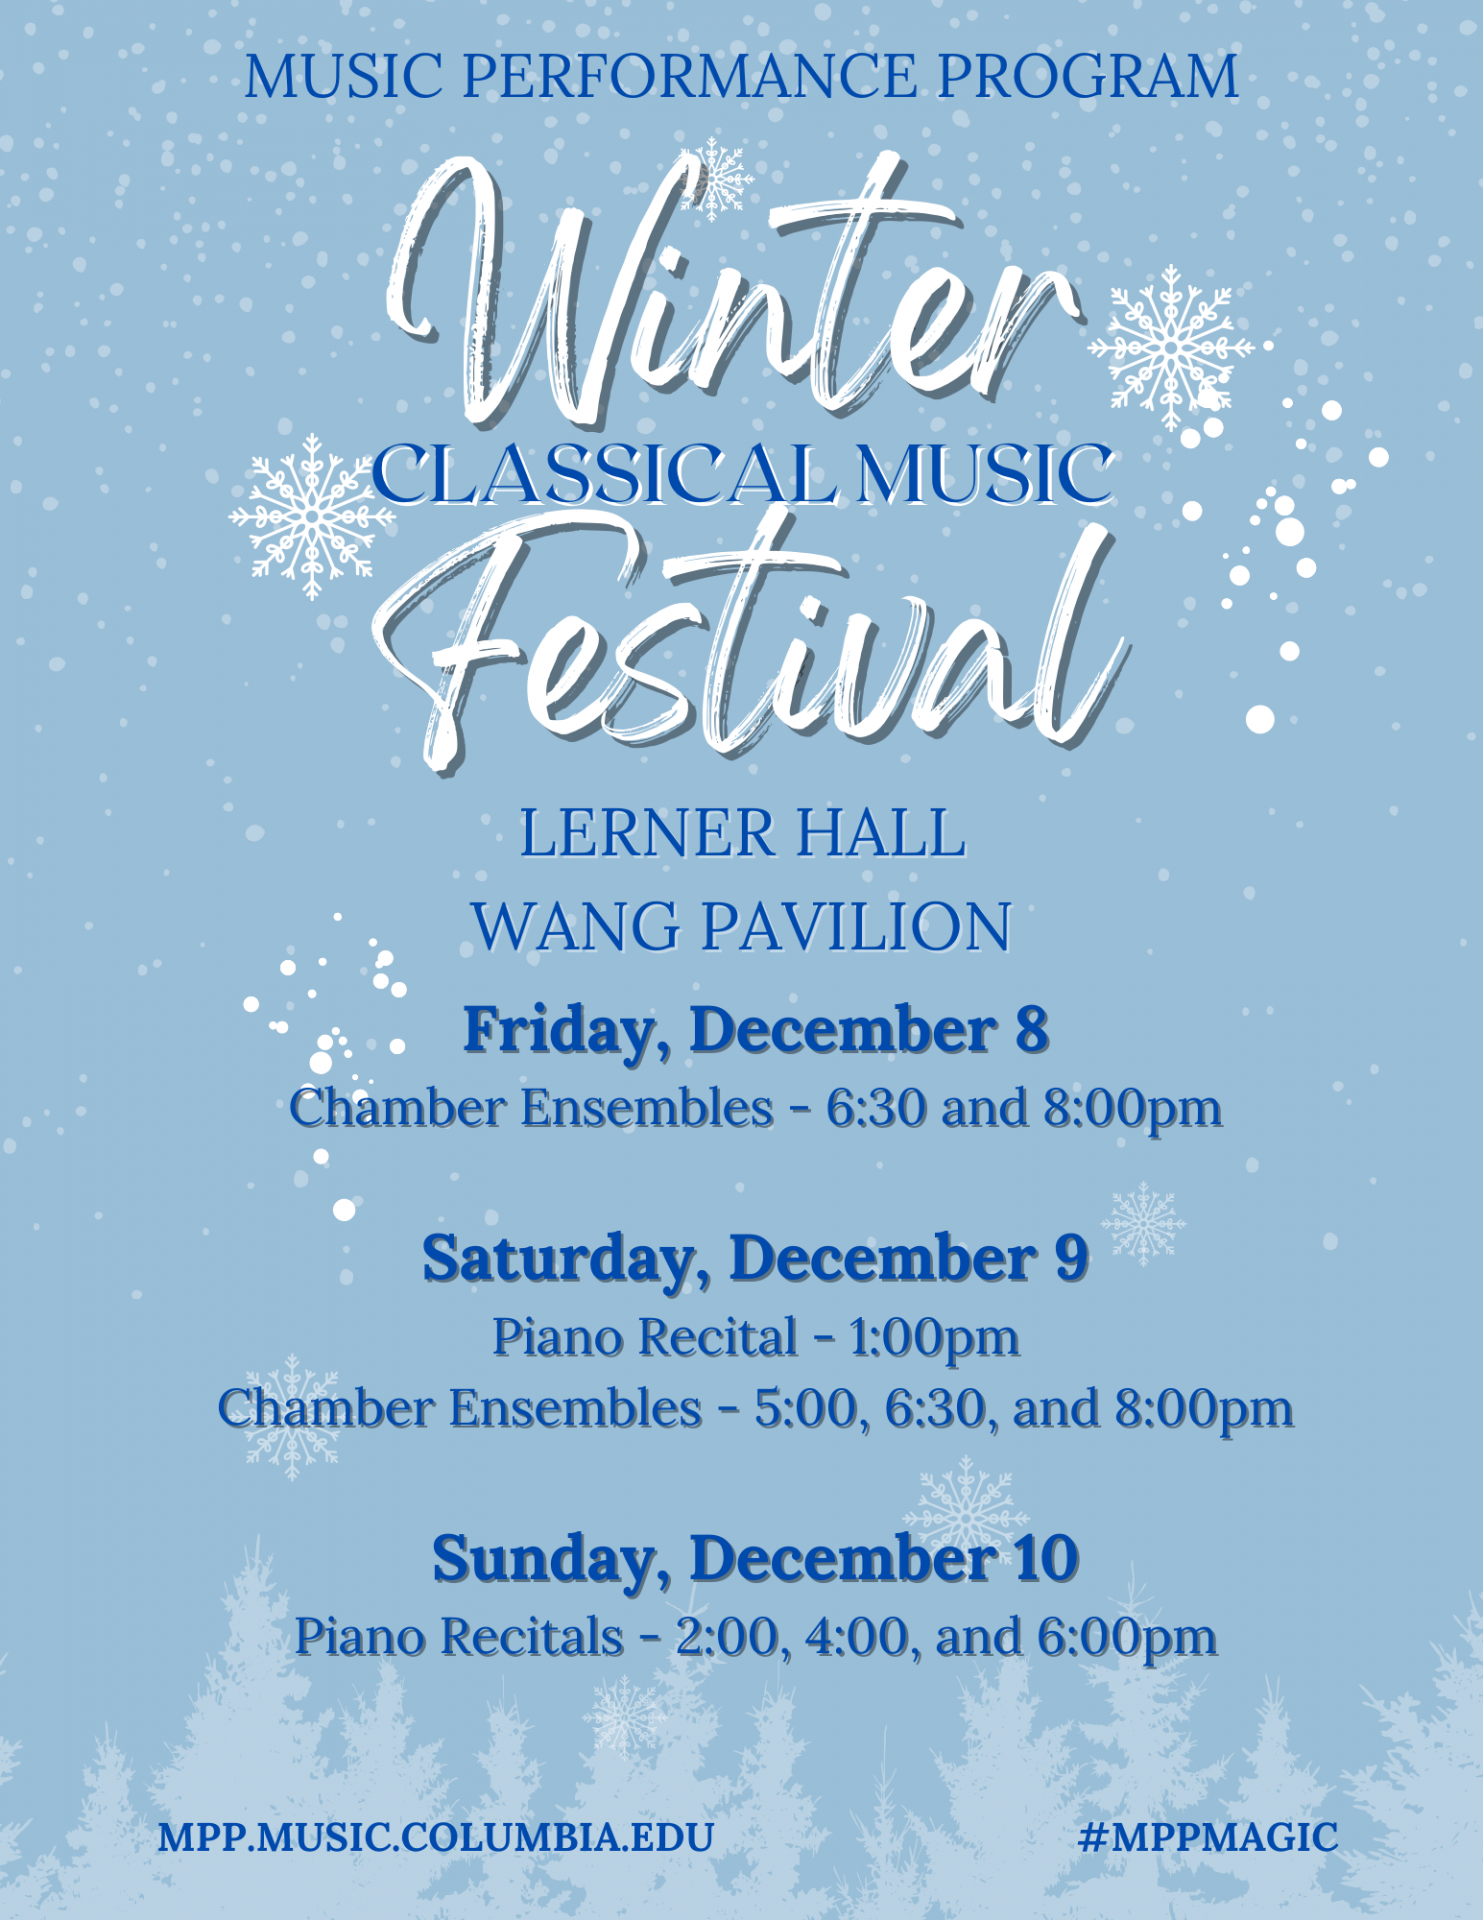 Flyer for Classical Music Winter Festival concert, with the dates on the flyer being: Friday, December 8  Chamber Ensembles - 6:30 and 8:00pm; Saturday, December 9  Piano Recital - 1:00pm  Chamber Ensembles - 5:00, 6:30, and 8:00pm; Sunday, December 10  Piano Recitals - 2:00, 4:00, and 6:00pm